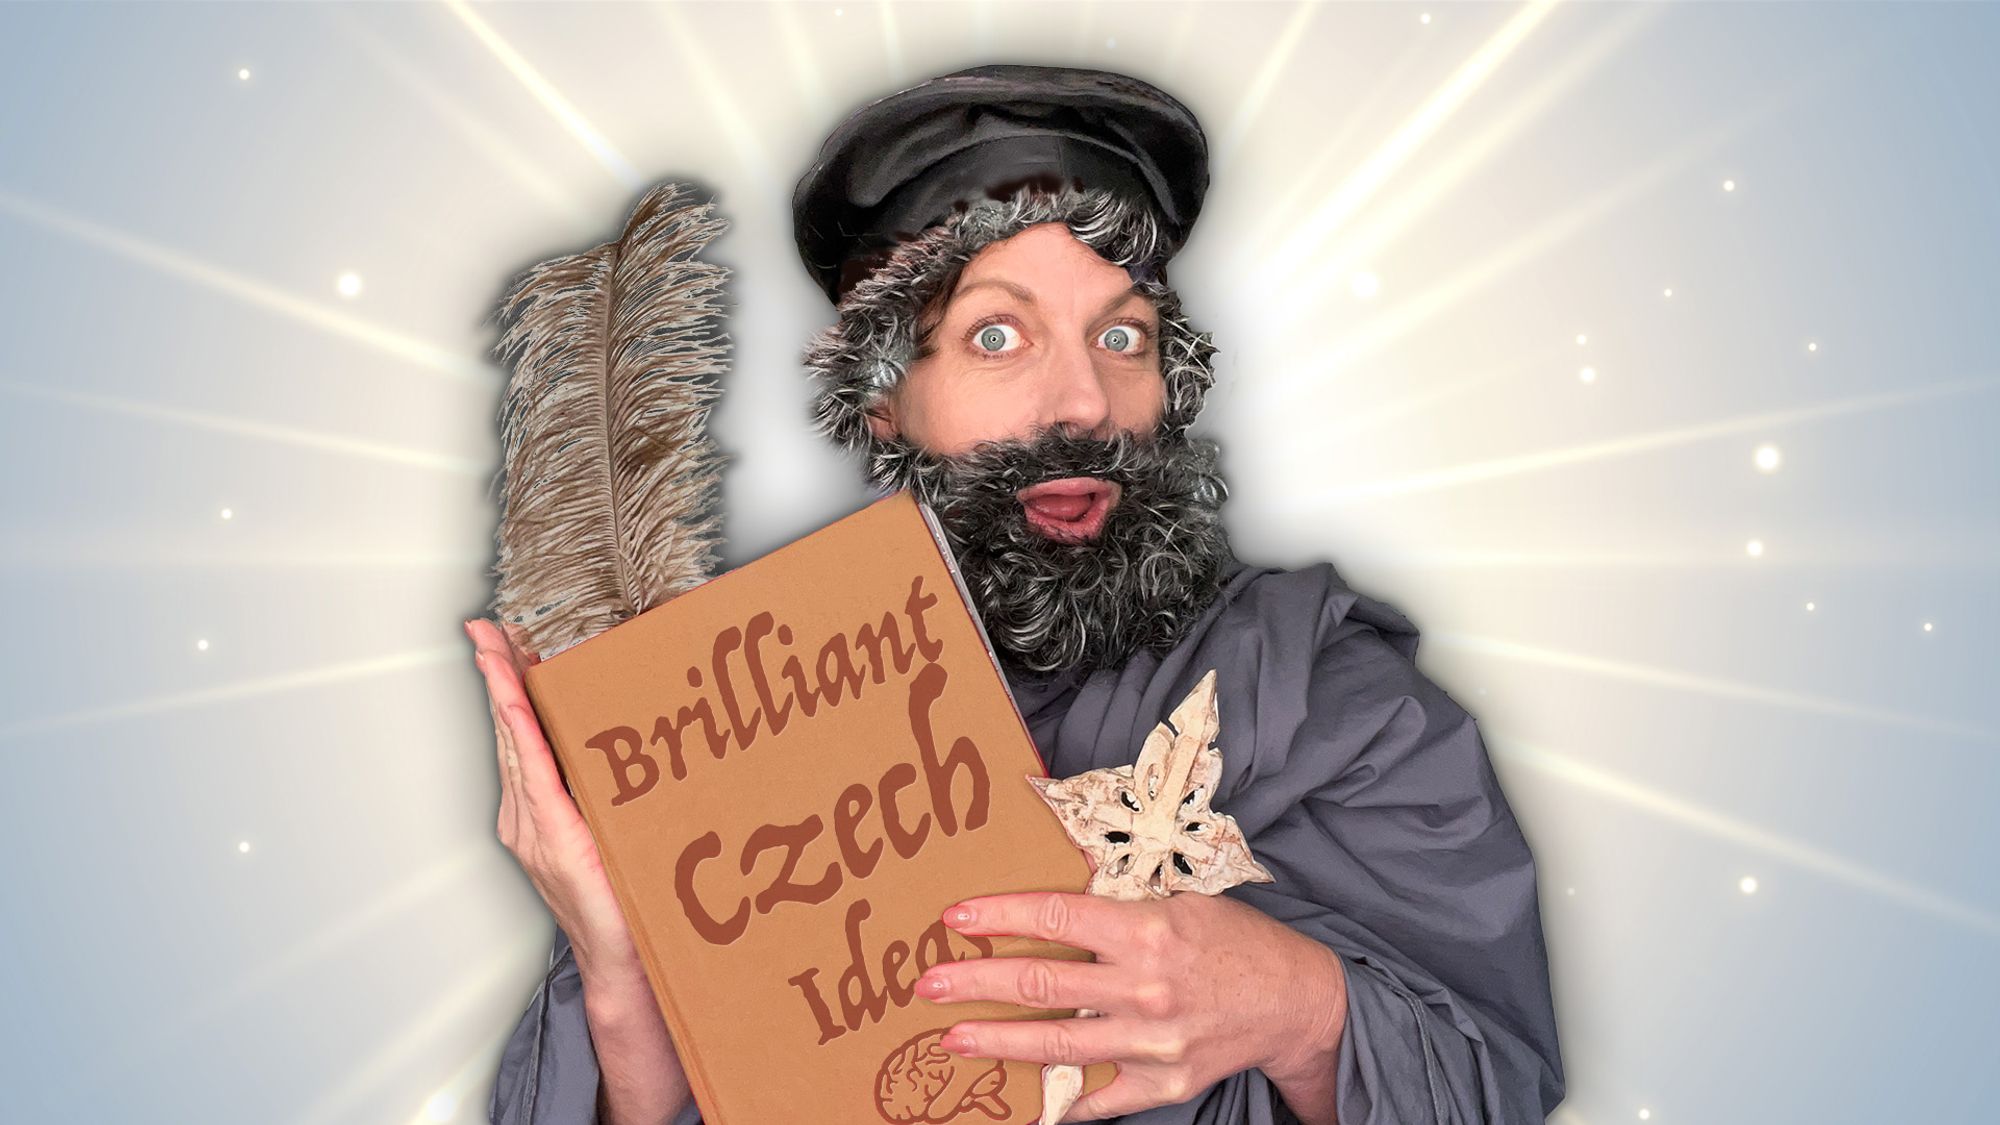 The Czechs were robbed! (the story of Jan Hus)